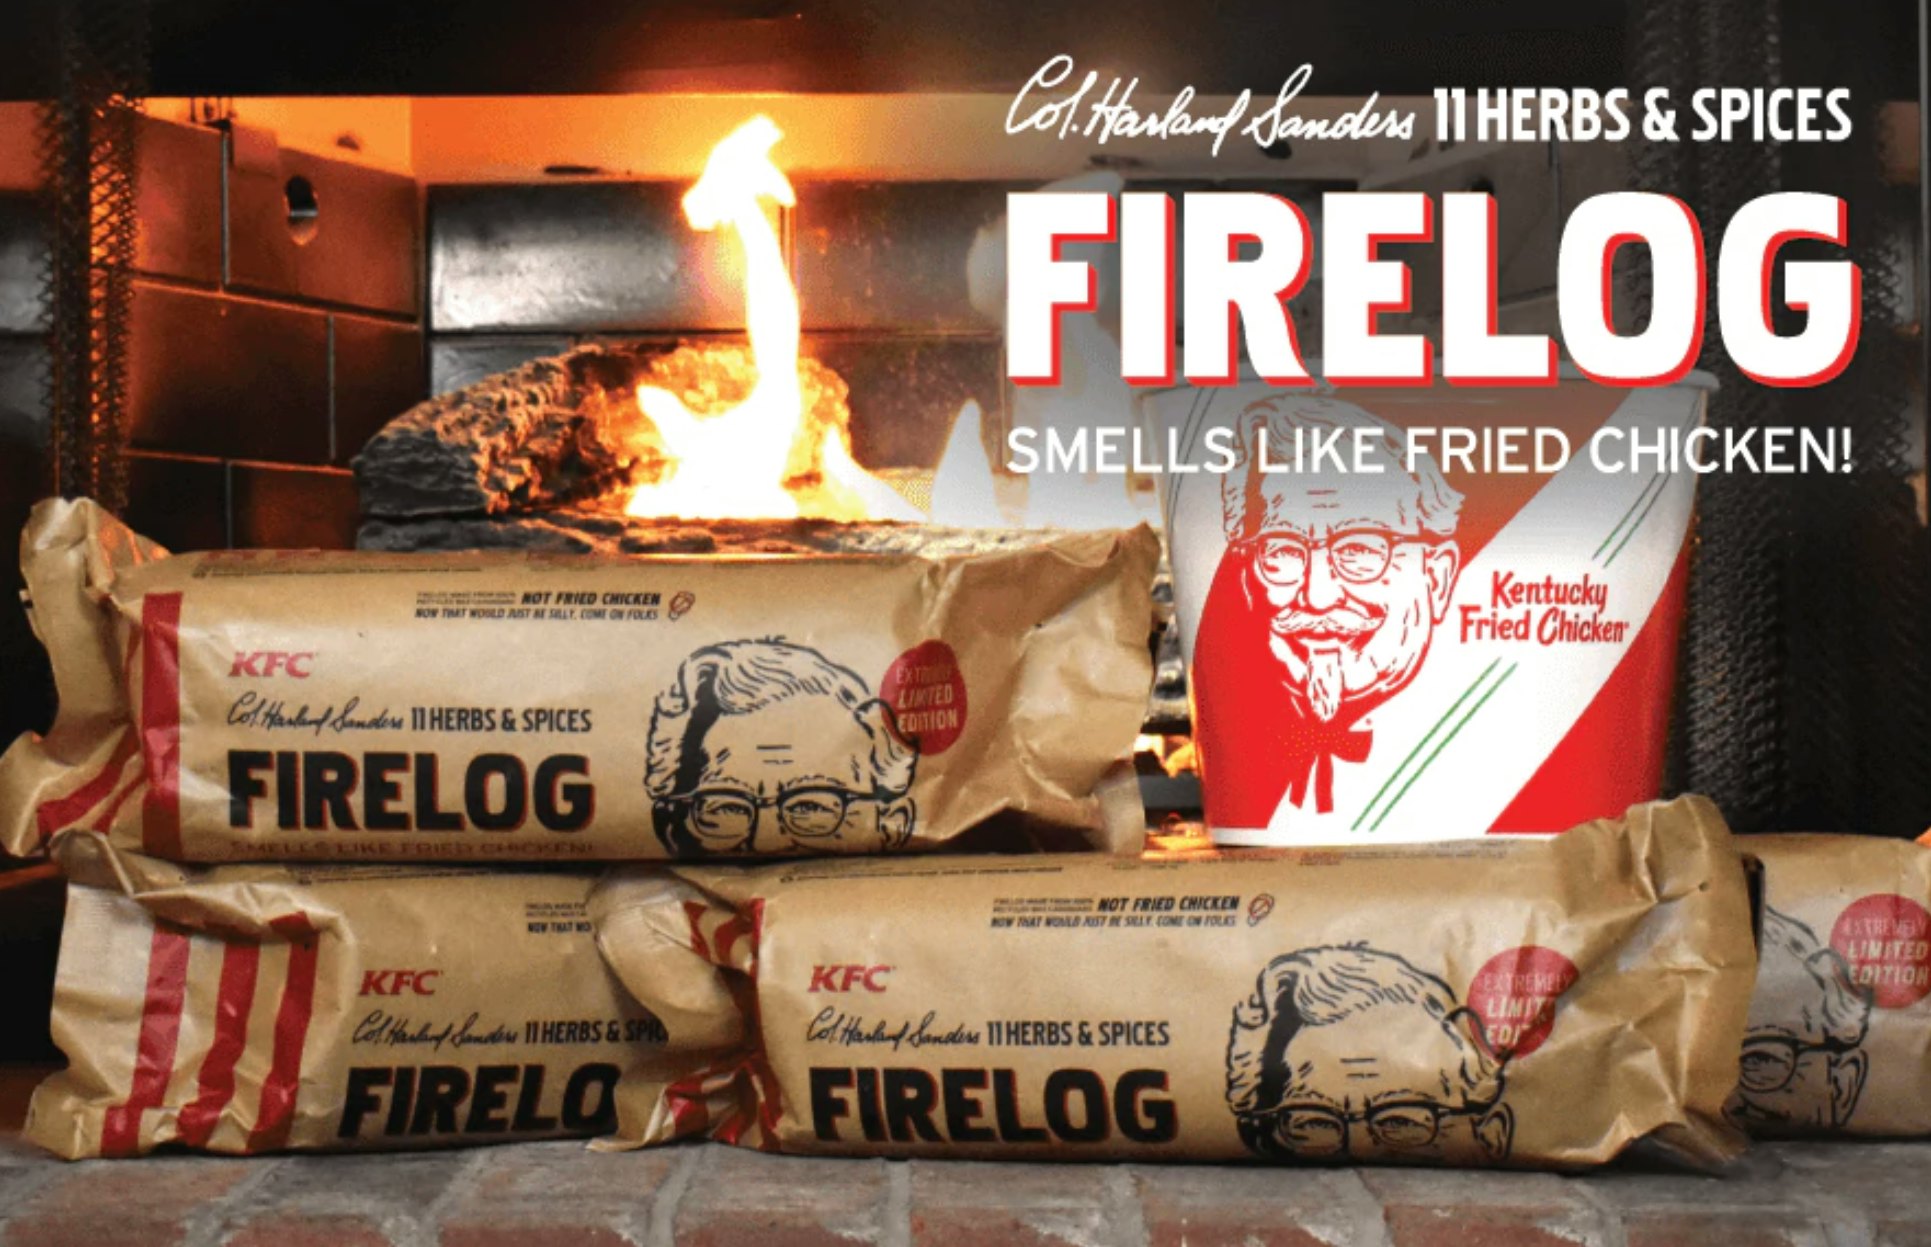 KFC Fire Log 11 Herbs and spices ENVIROLOG Kentucky Fried Chicken SEALED 